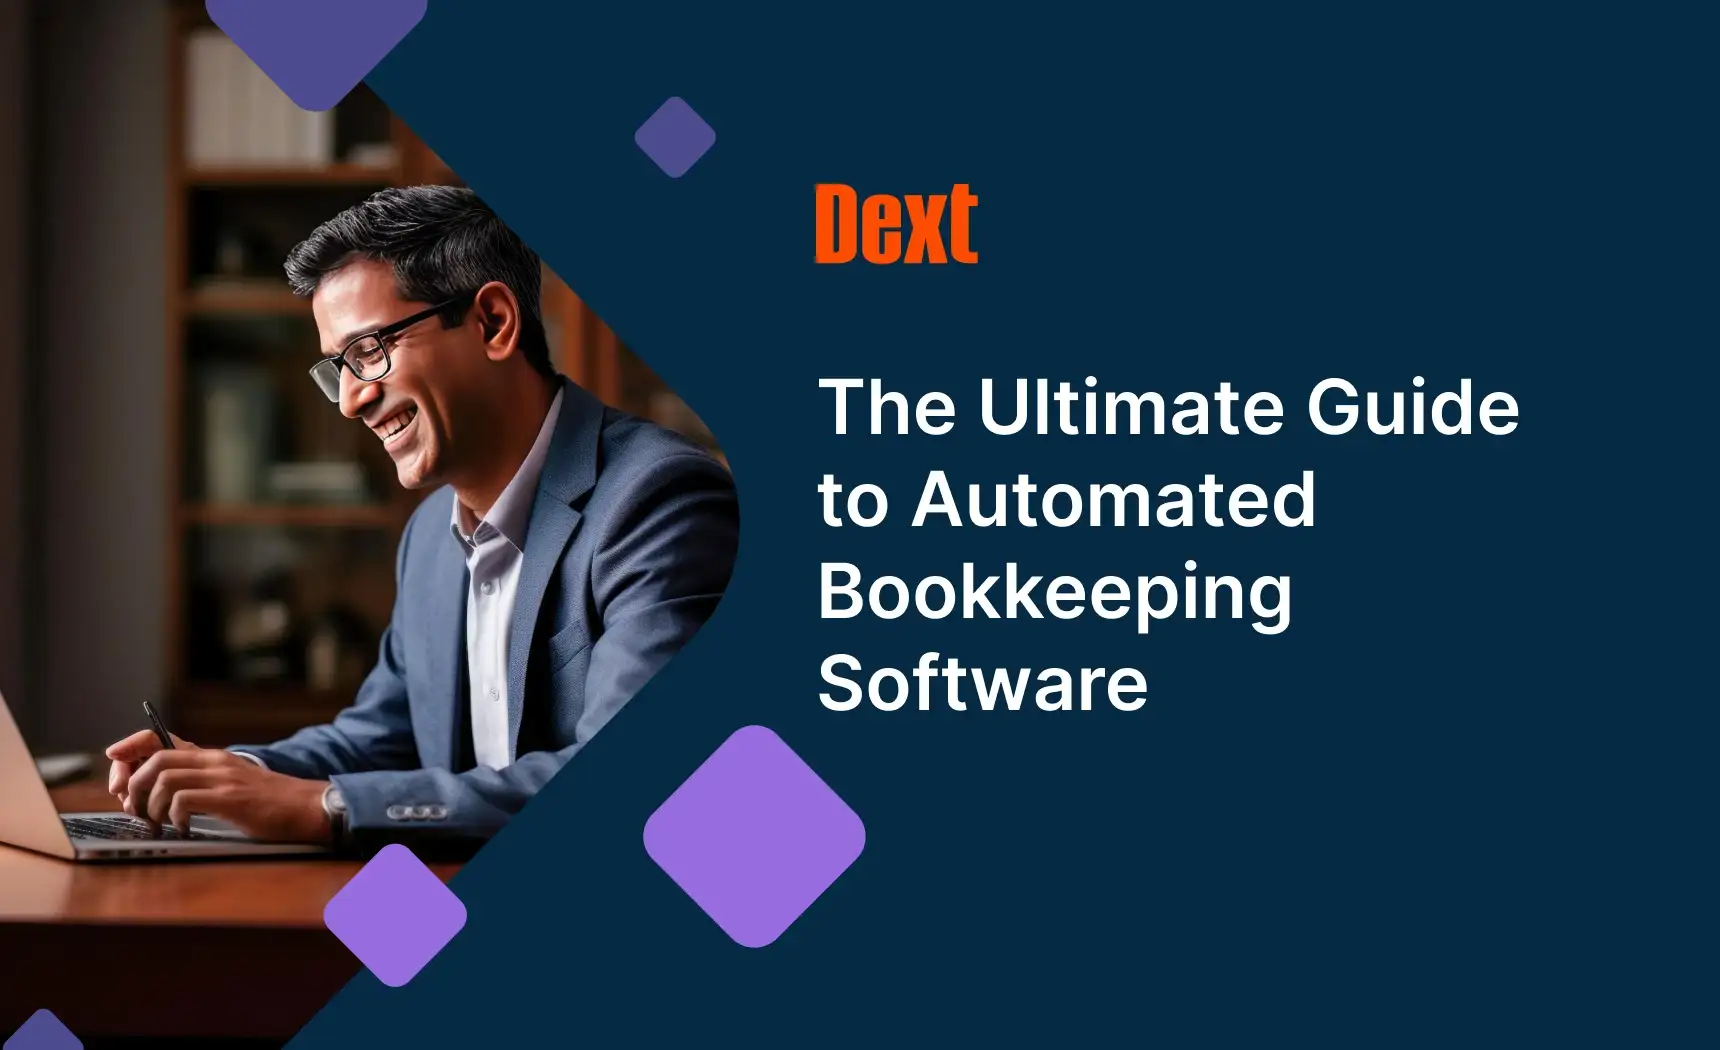 The Ultimate Guide to Automated Bookkeeping Software by Dext logo